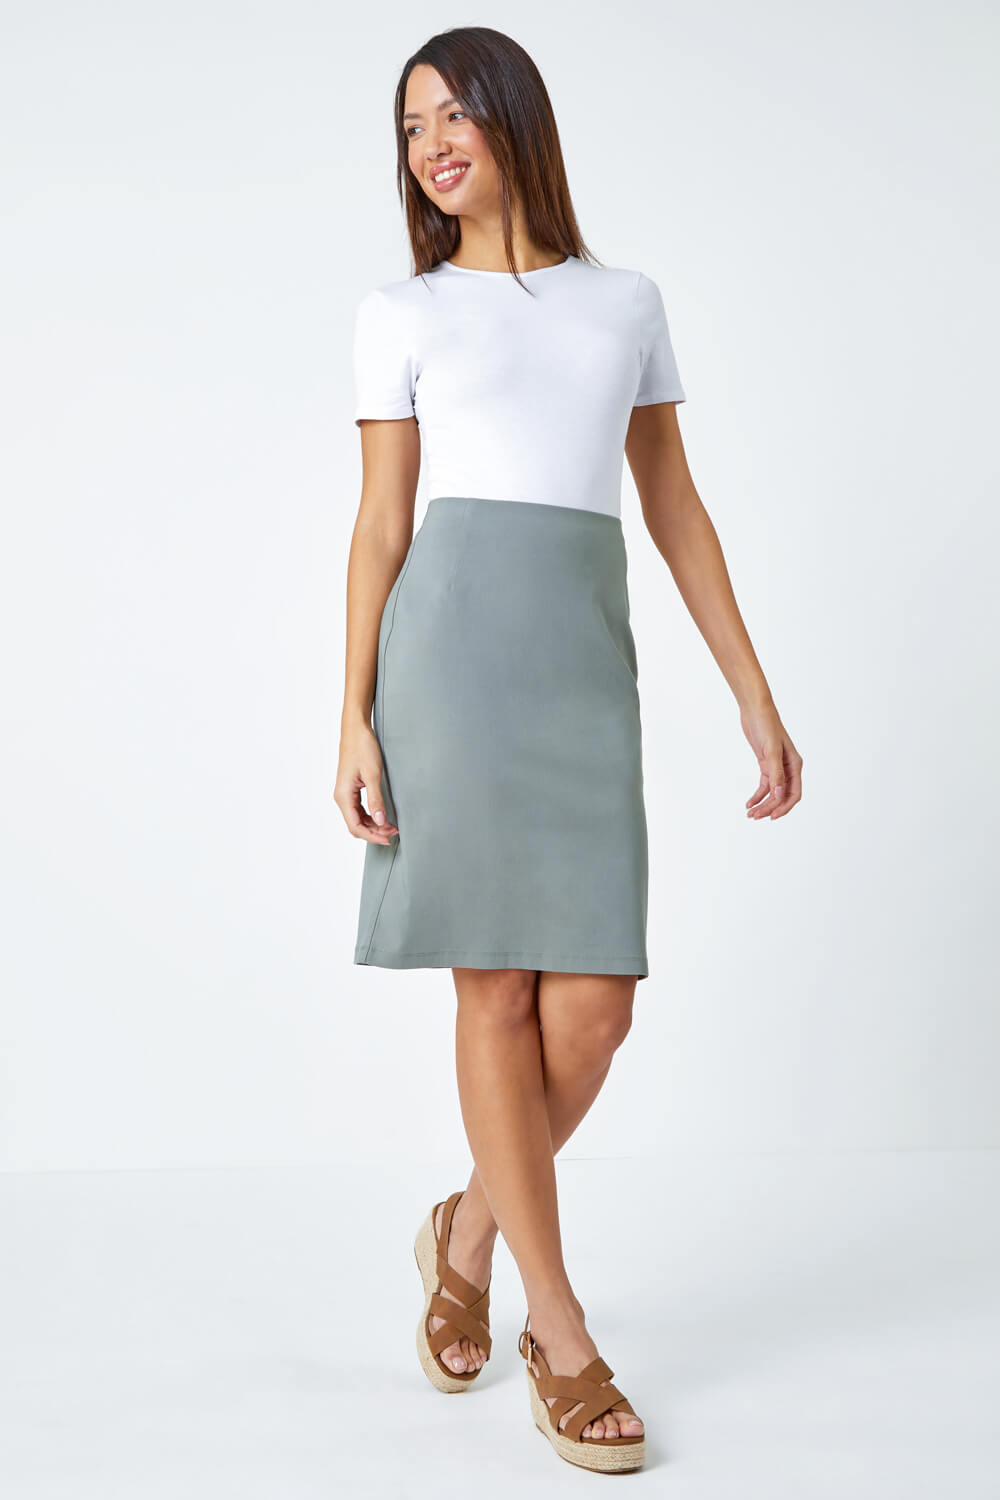 KHAKI Pull On Stretch Pencil Skirt, Image 2 of 5